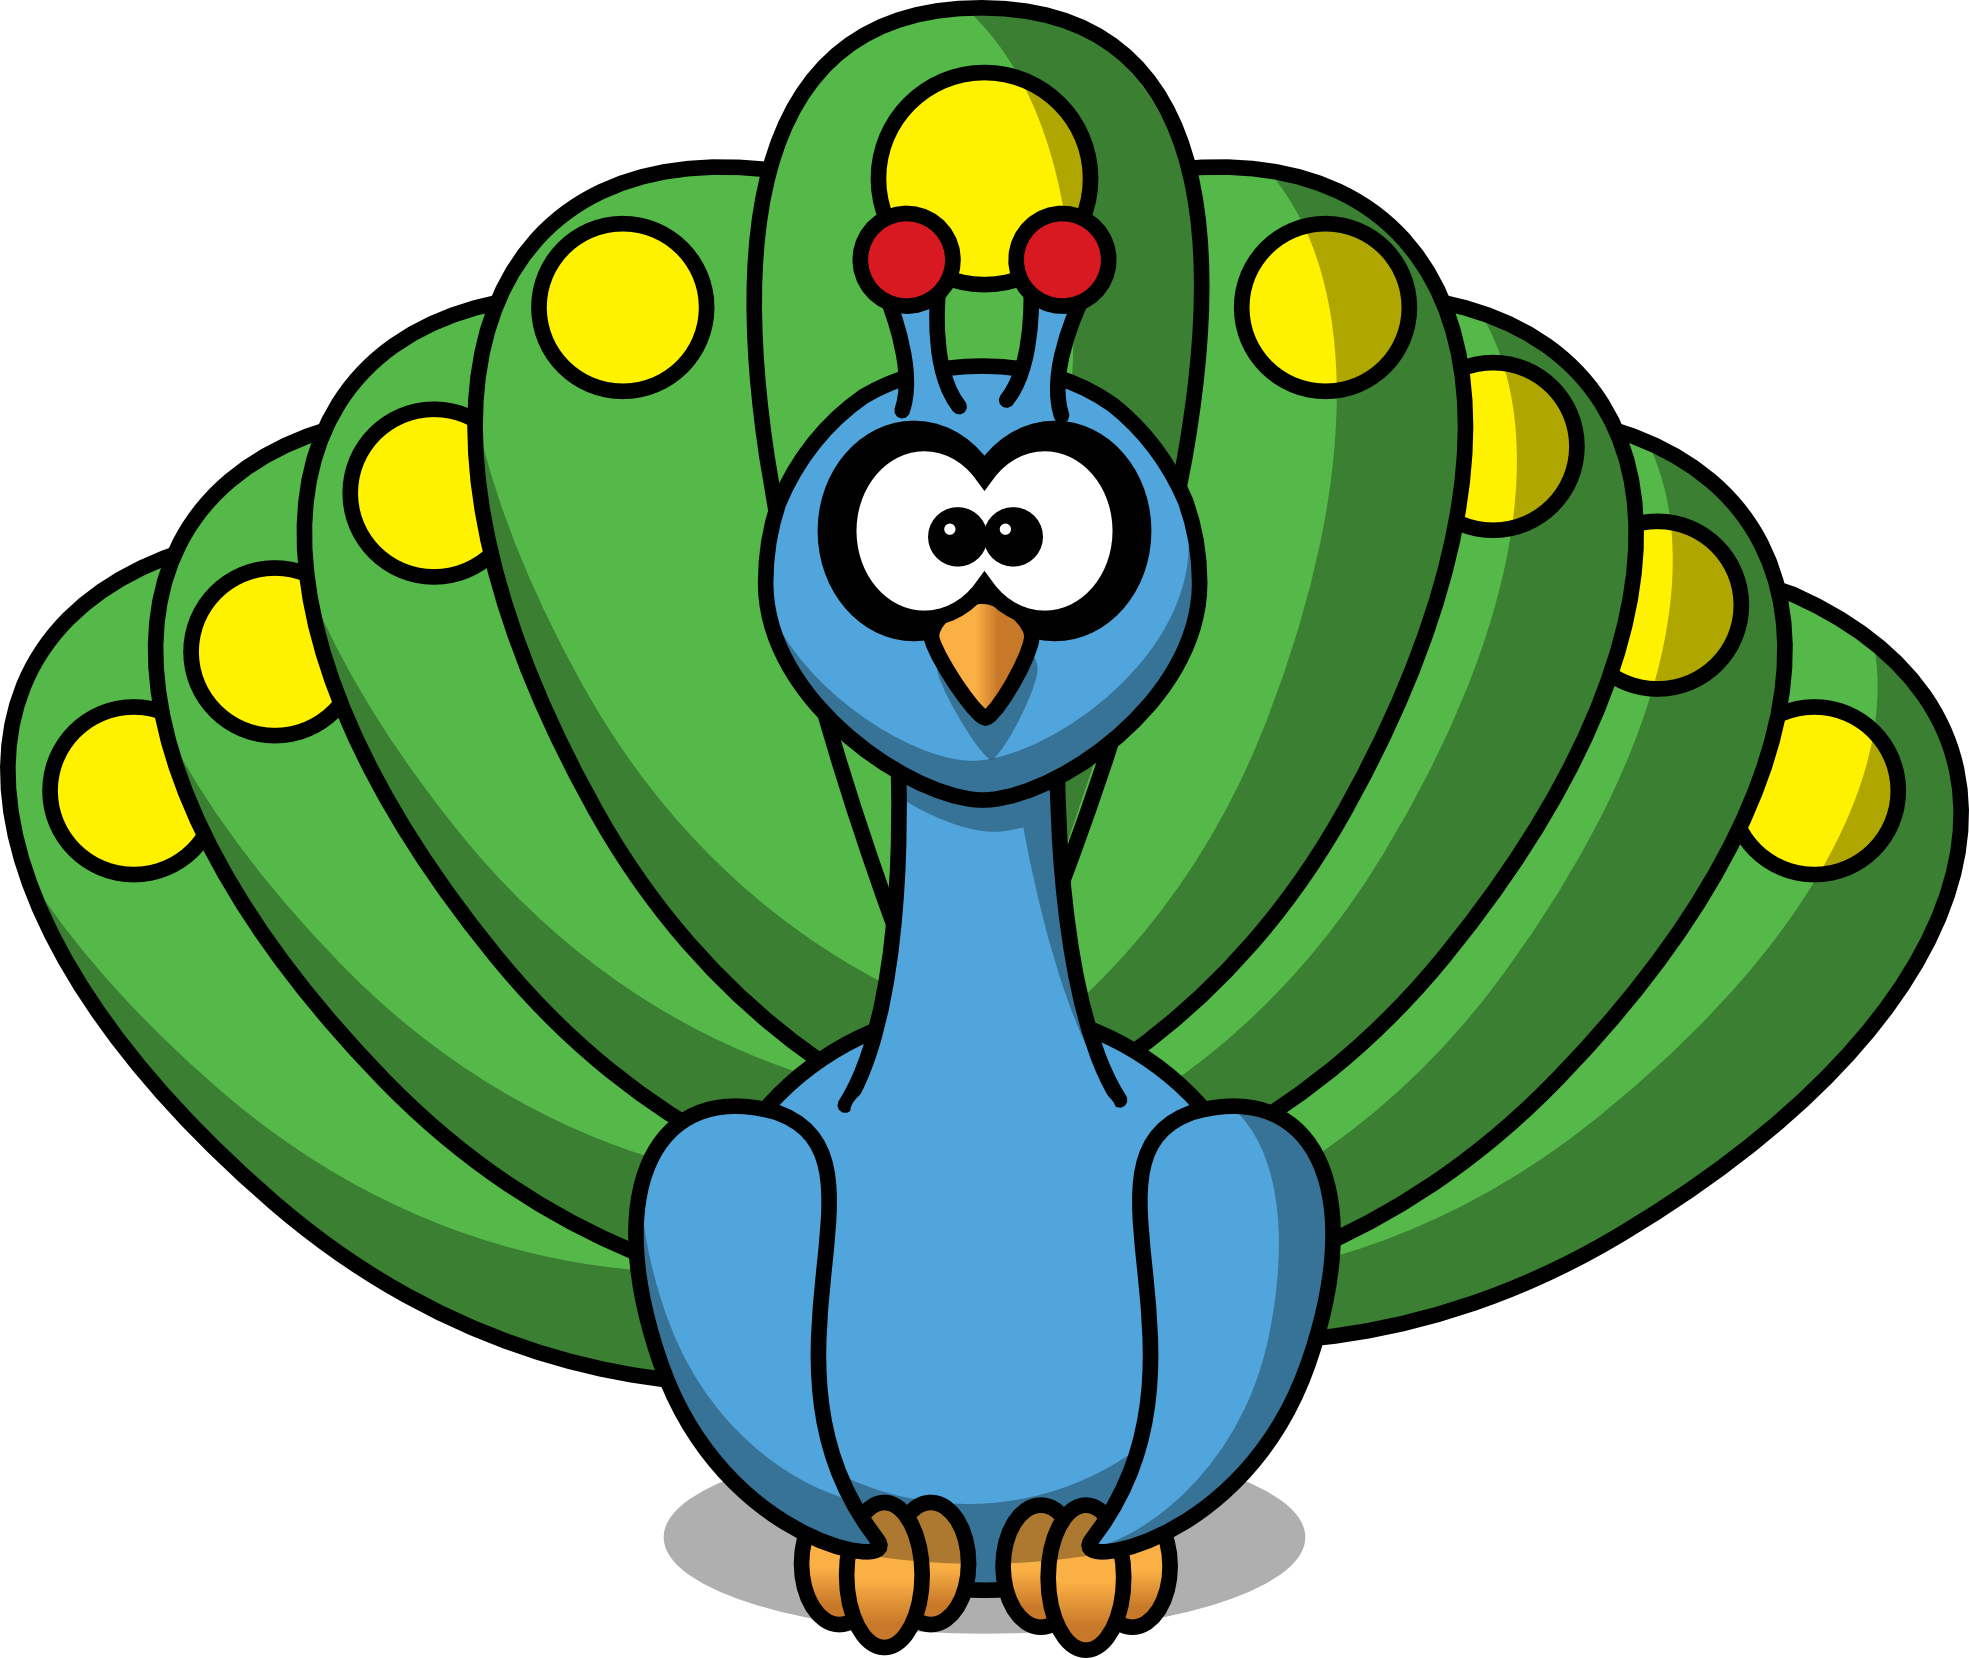 Peacock clipart free images 3